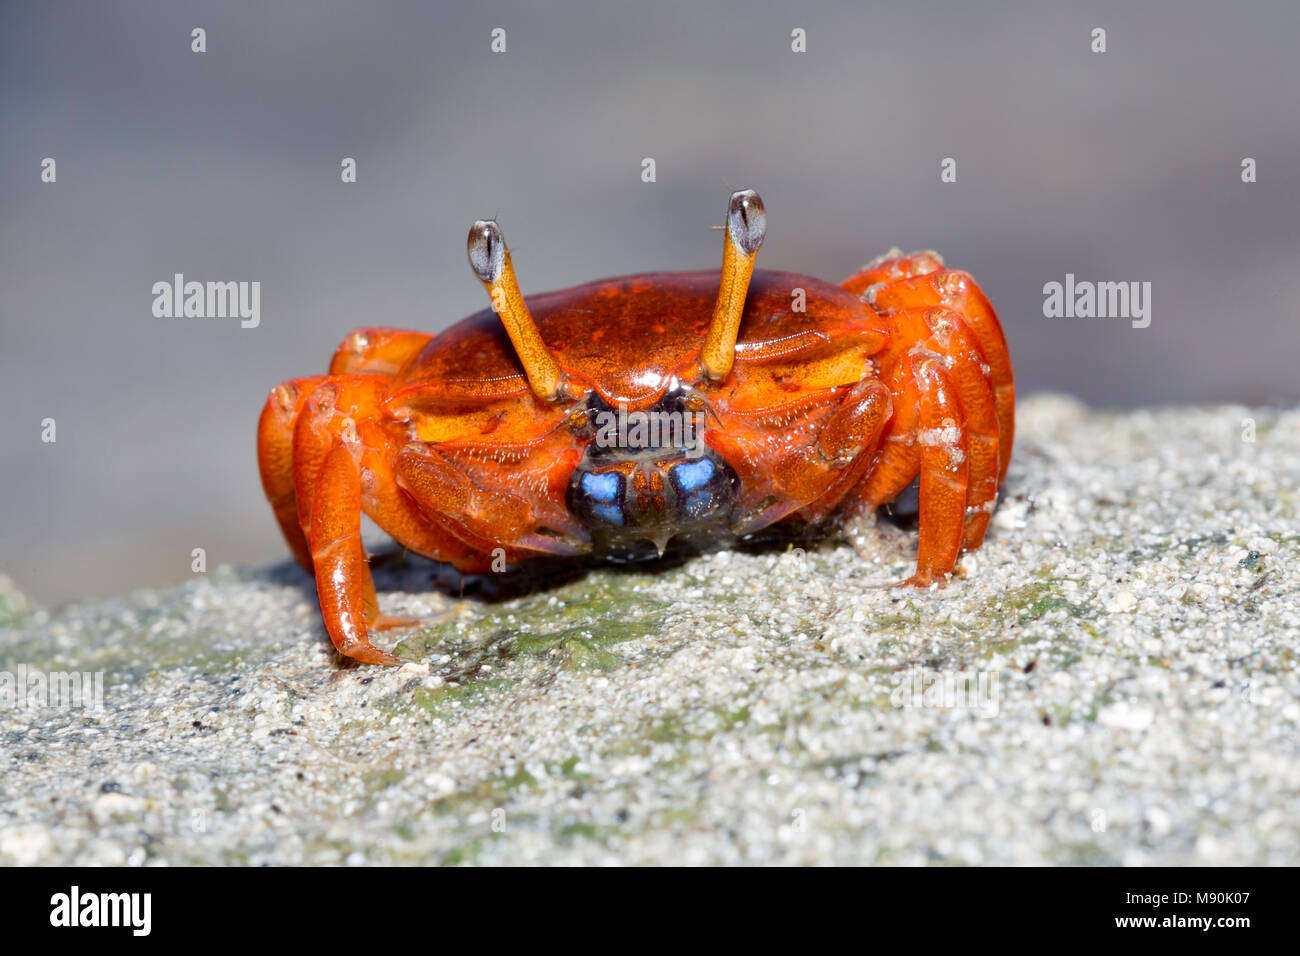 A female fiddler crab, Uca sp, on the island of Yap, Micronesia. Stock Photo